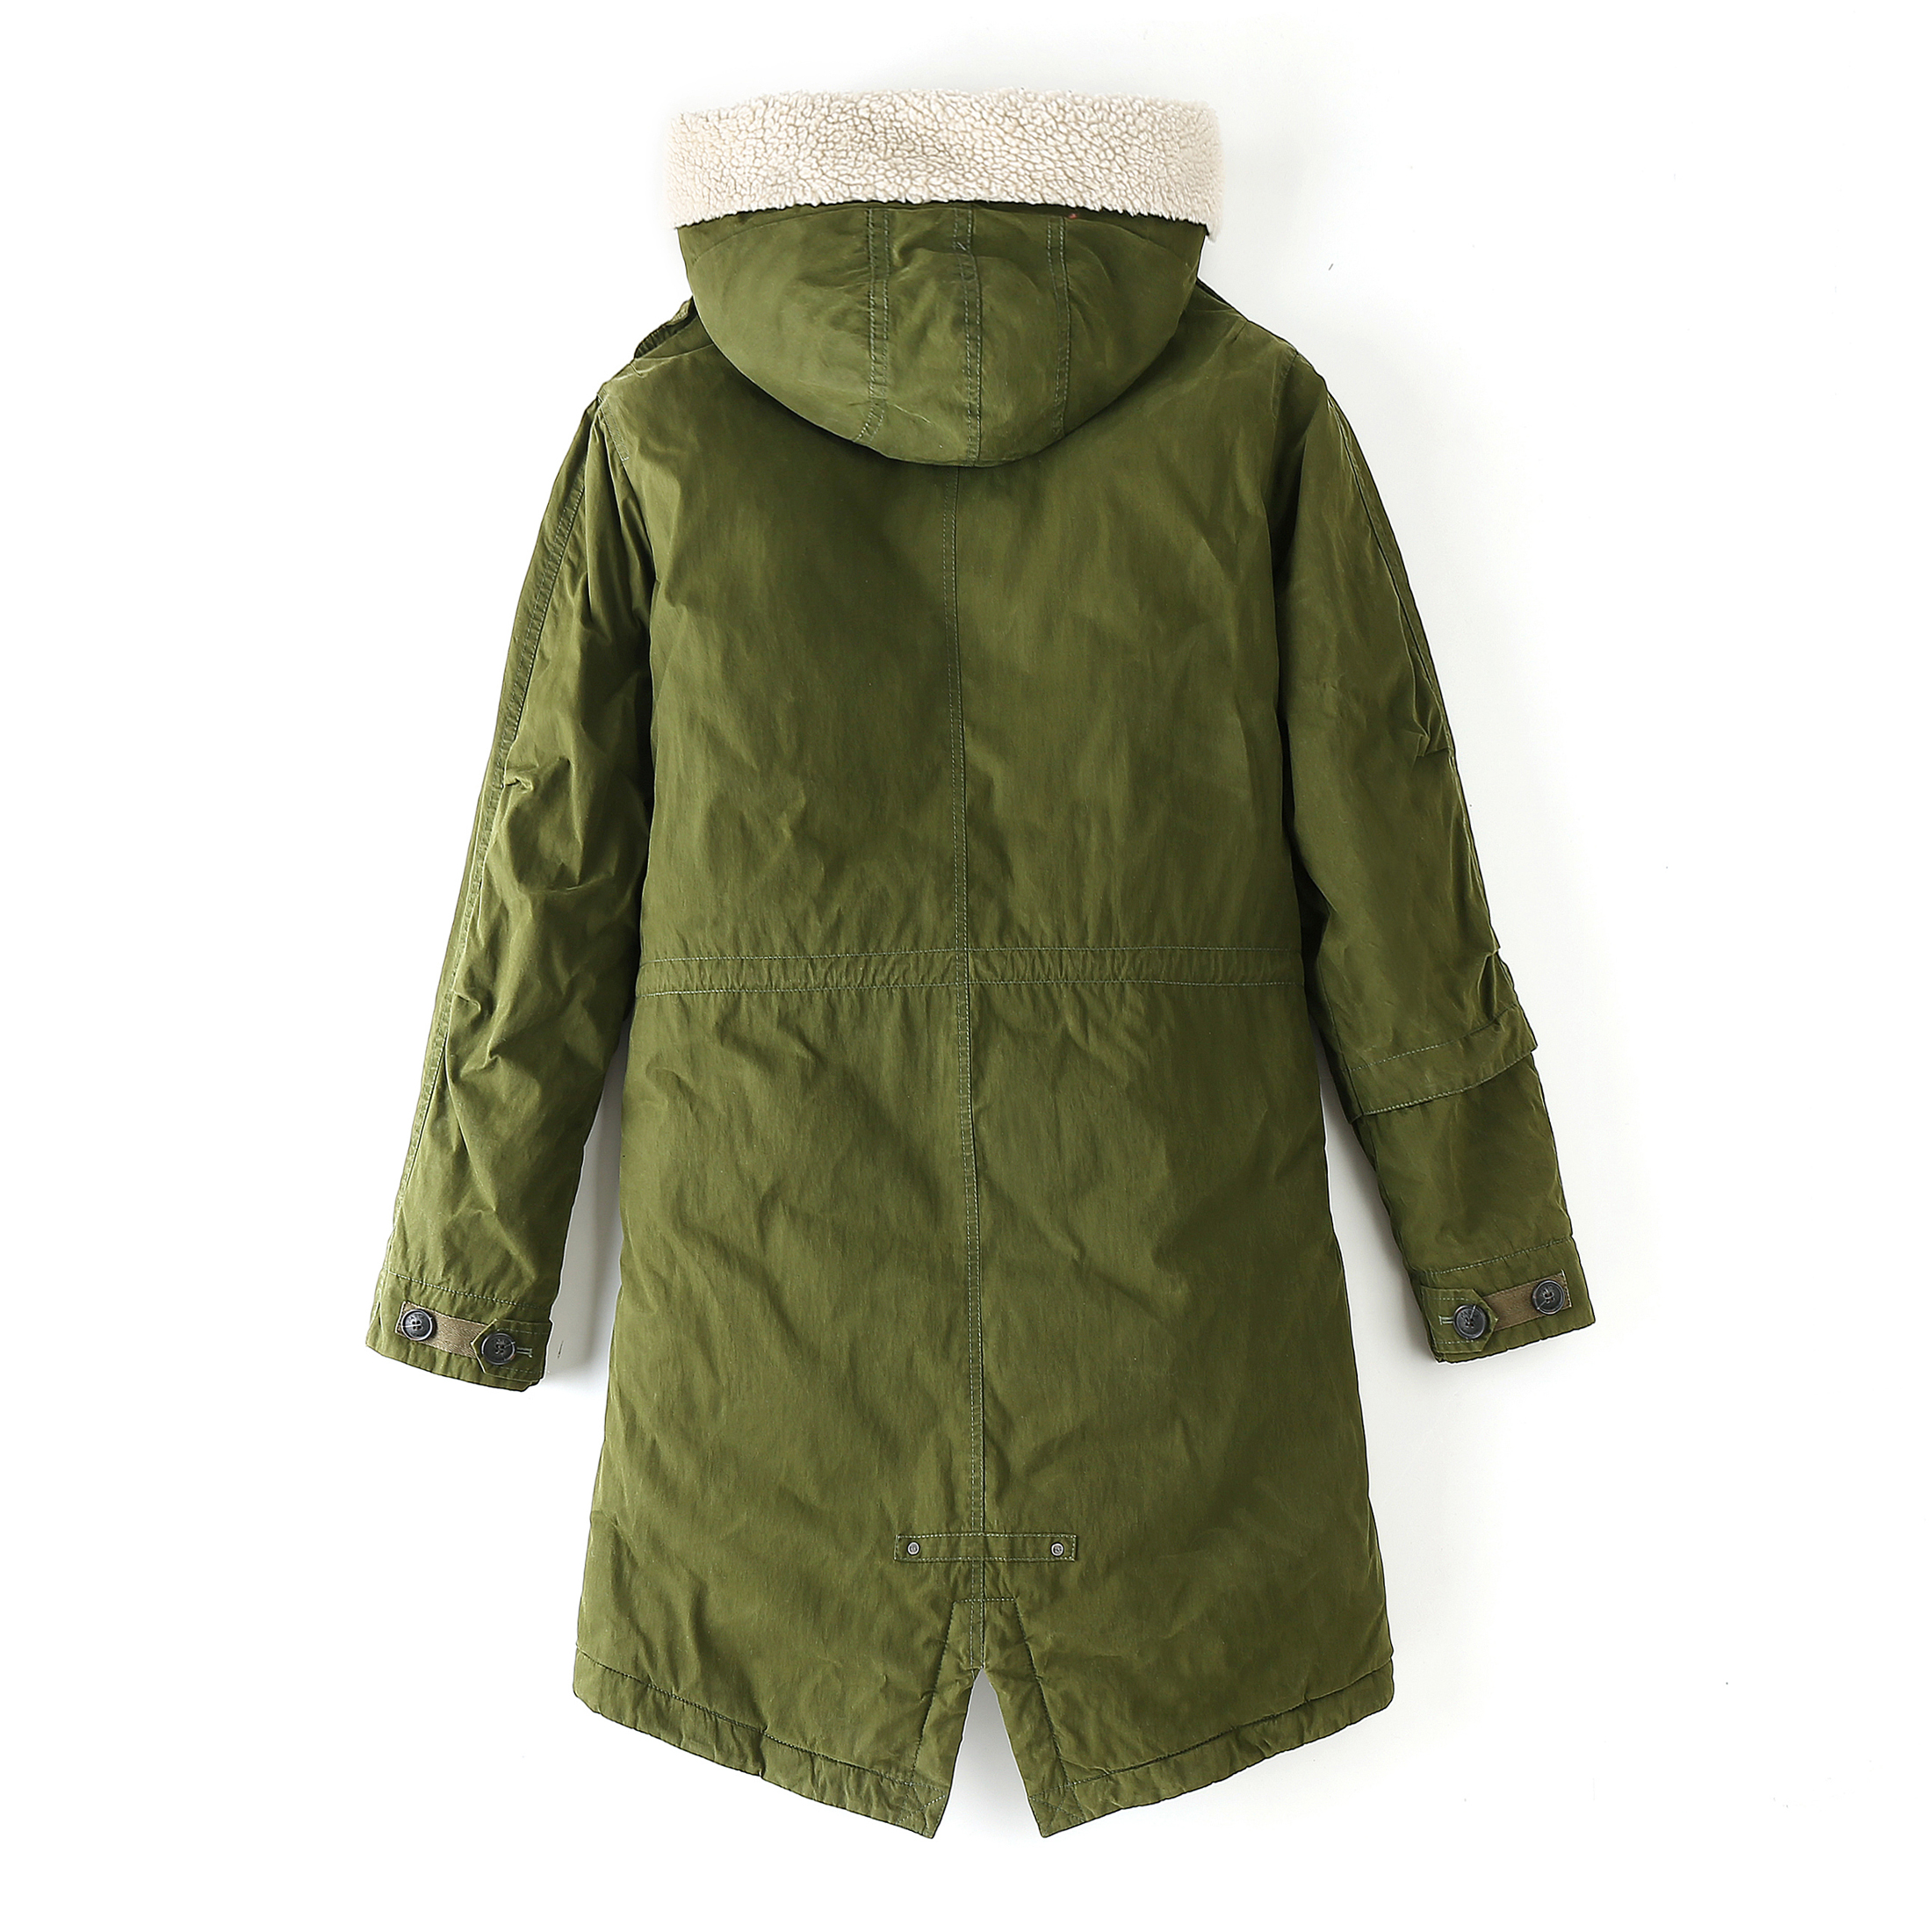 Washed Fashion Vintage Women's Recycle Cotton Padded Warm Parka